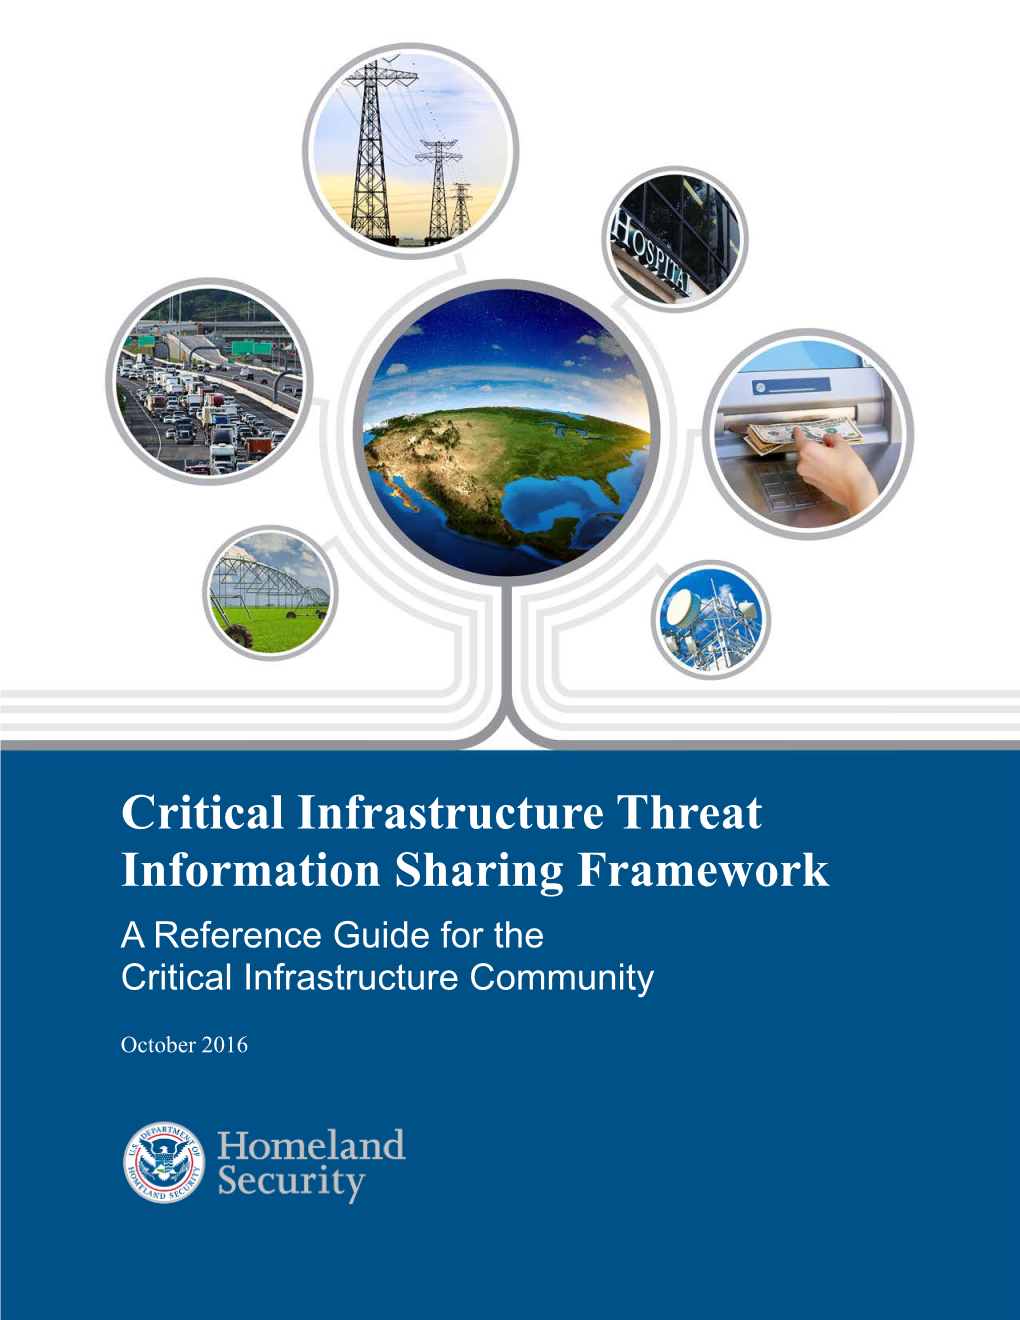 Critical Infrastructure Threat Information Sharing Framework a Reference Guide for the Critical Infrastructure Community